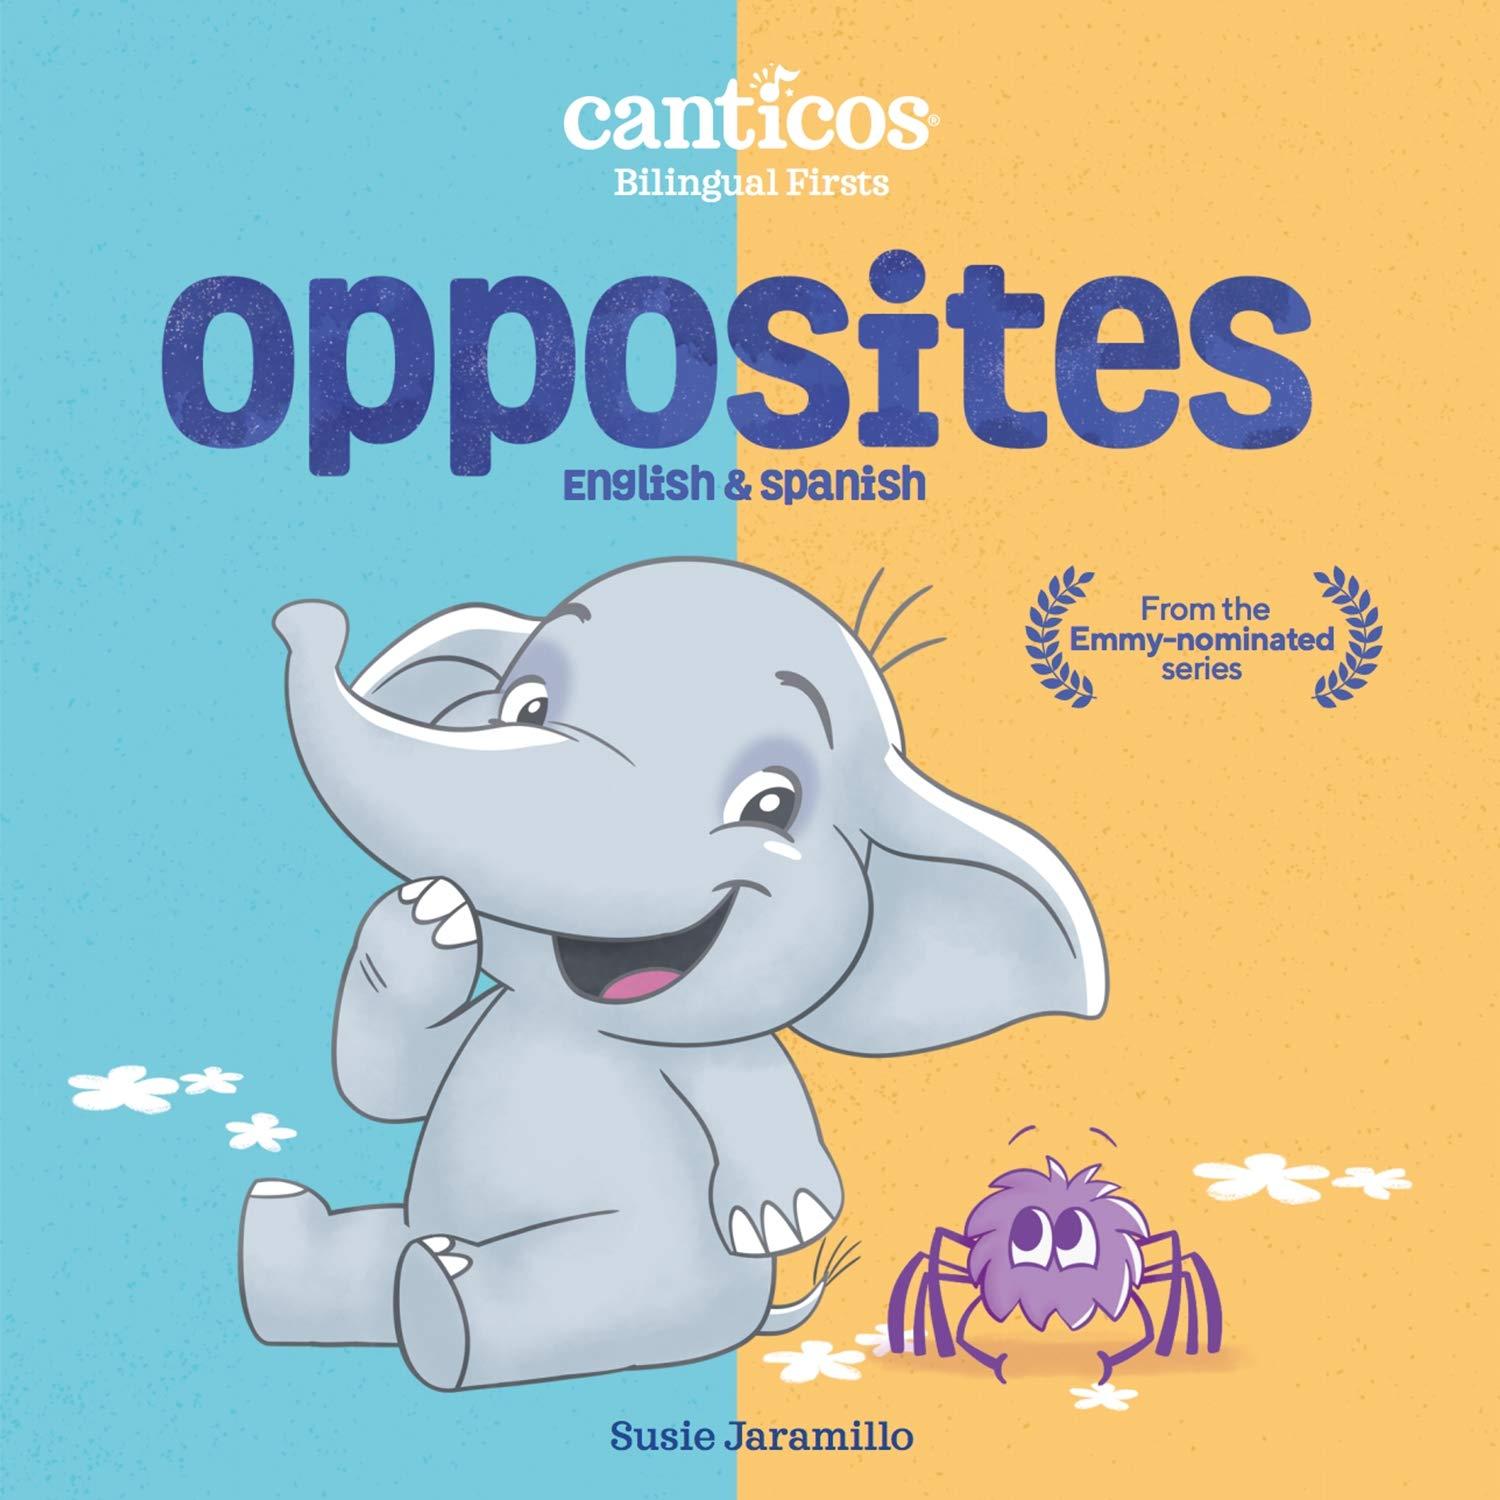 Opposites: Canticos Bilingual Firsts